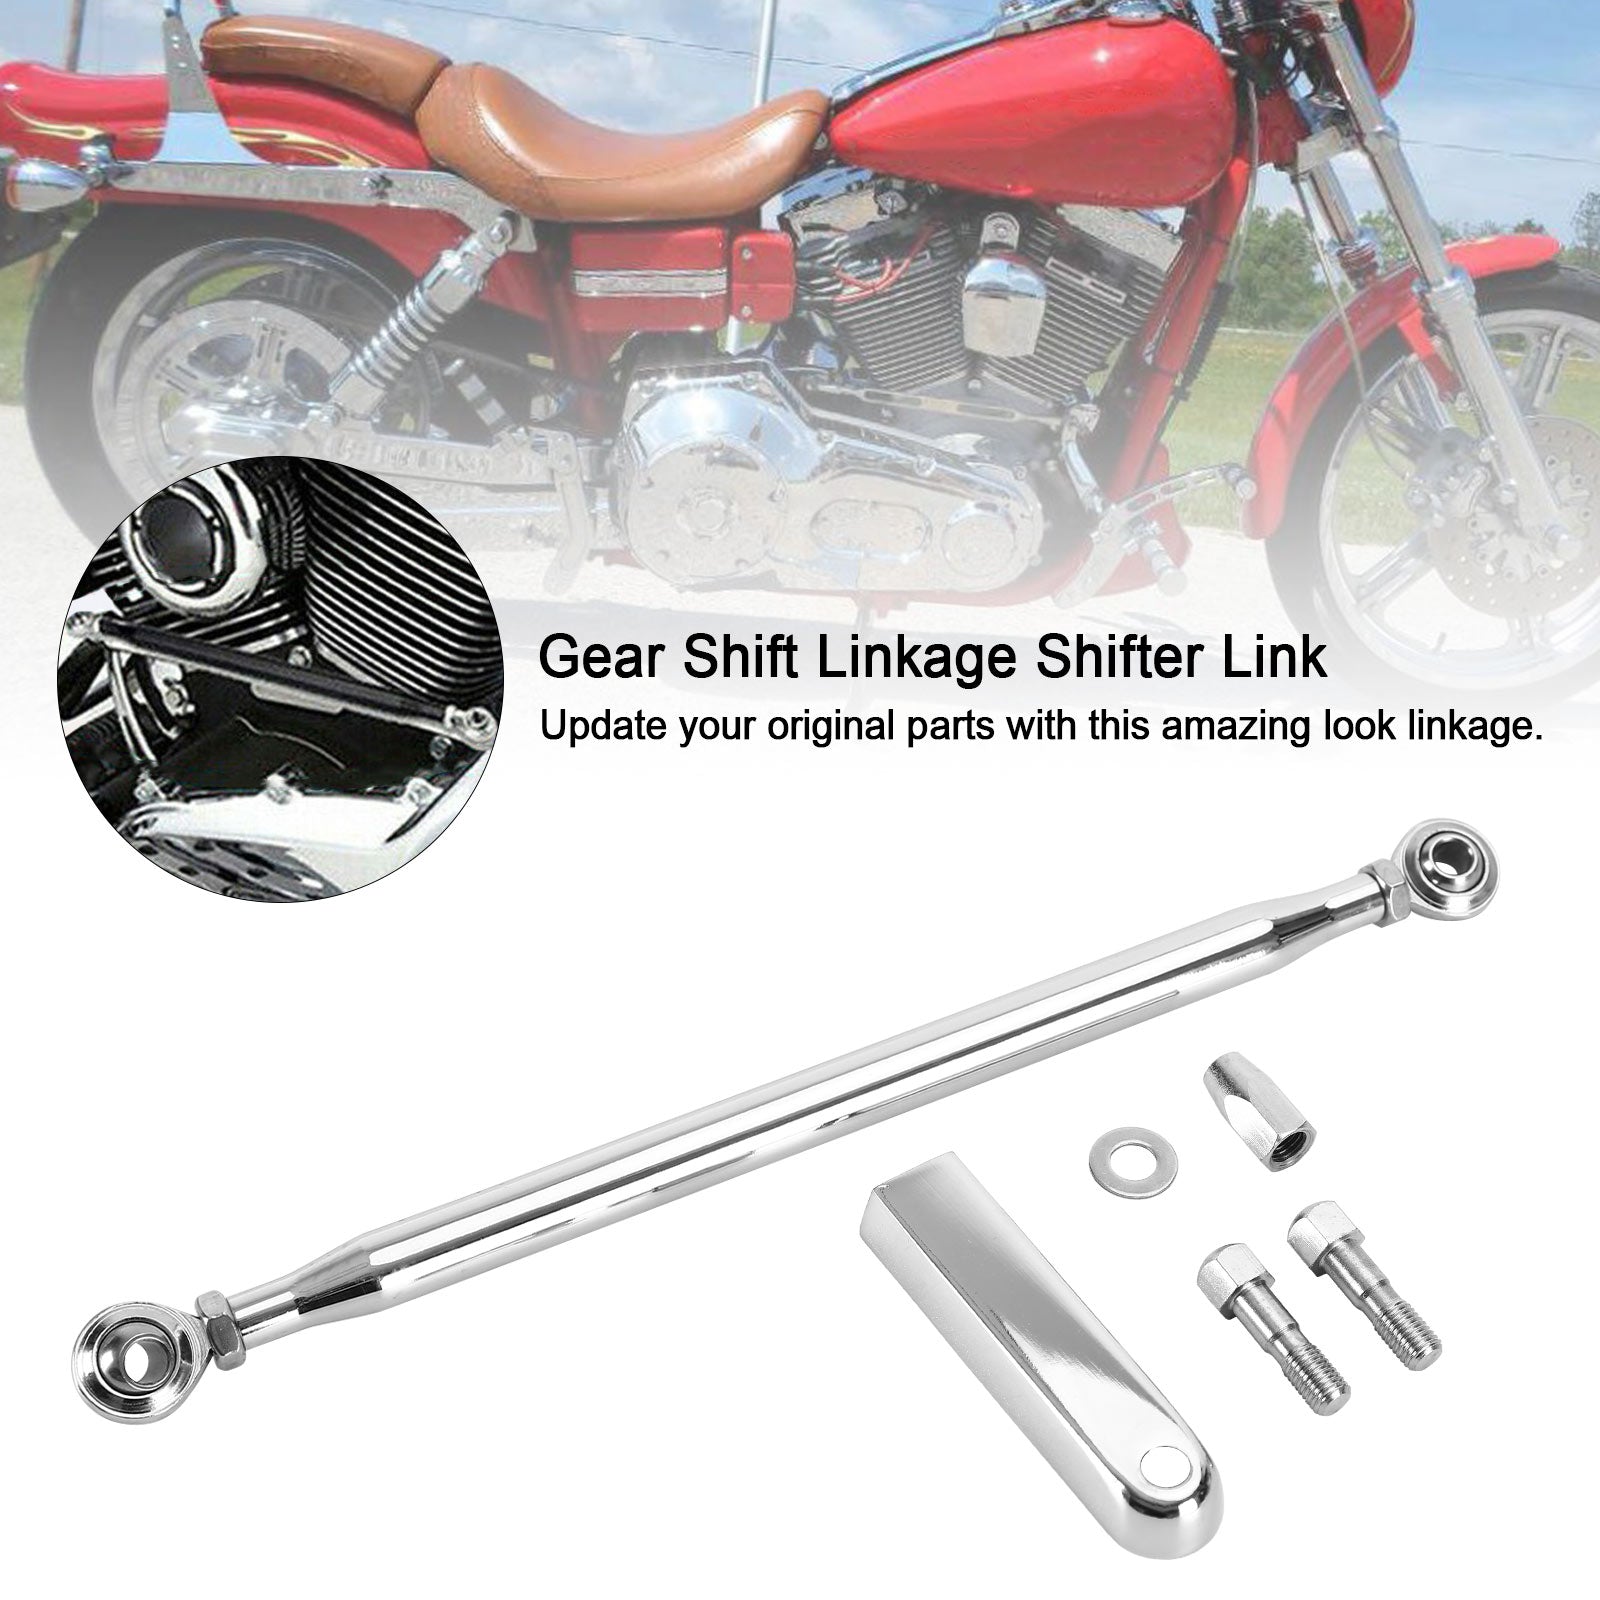 Gear Shift Linkage Shifter Link Fit For Touring Electra Softail Road Glide Generic